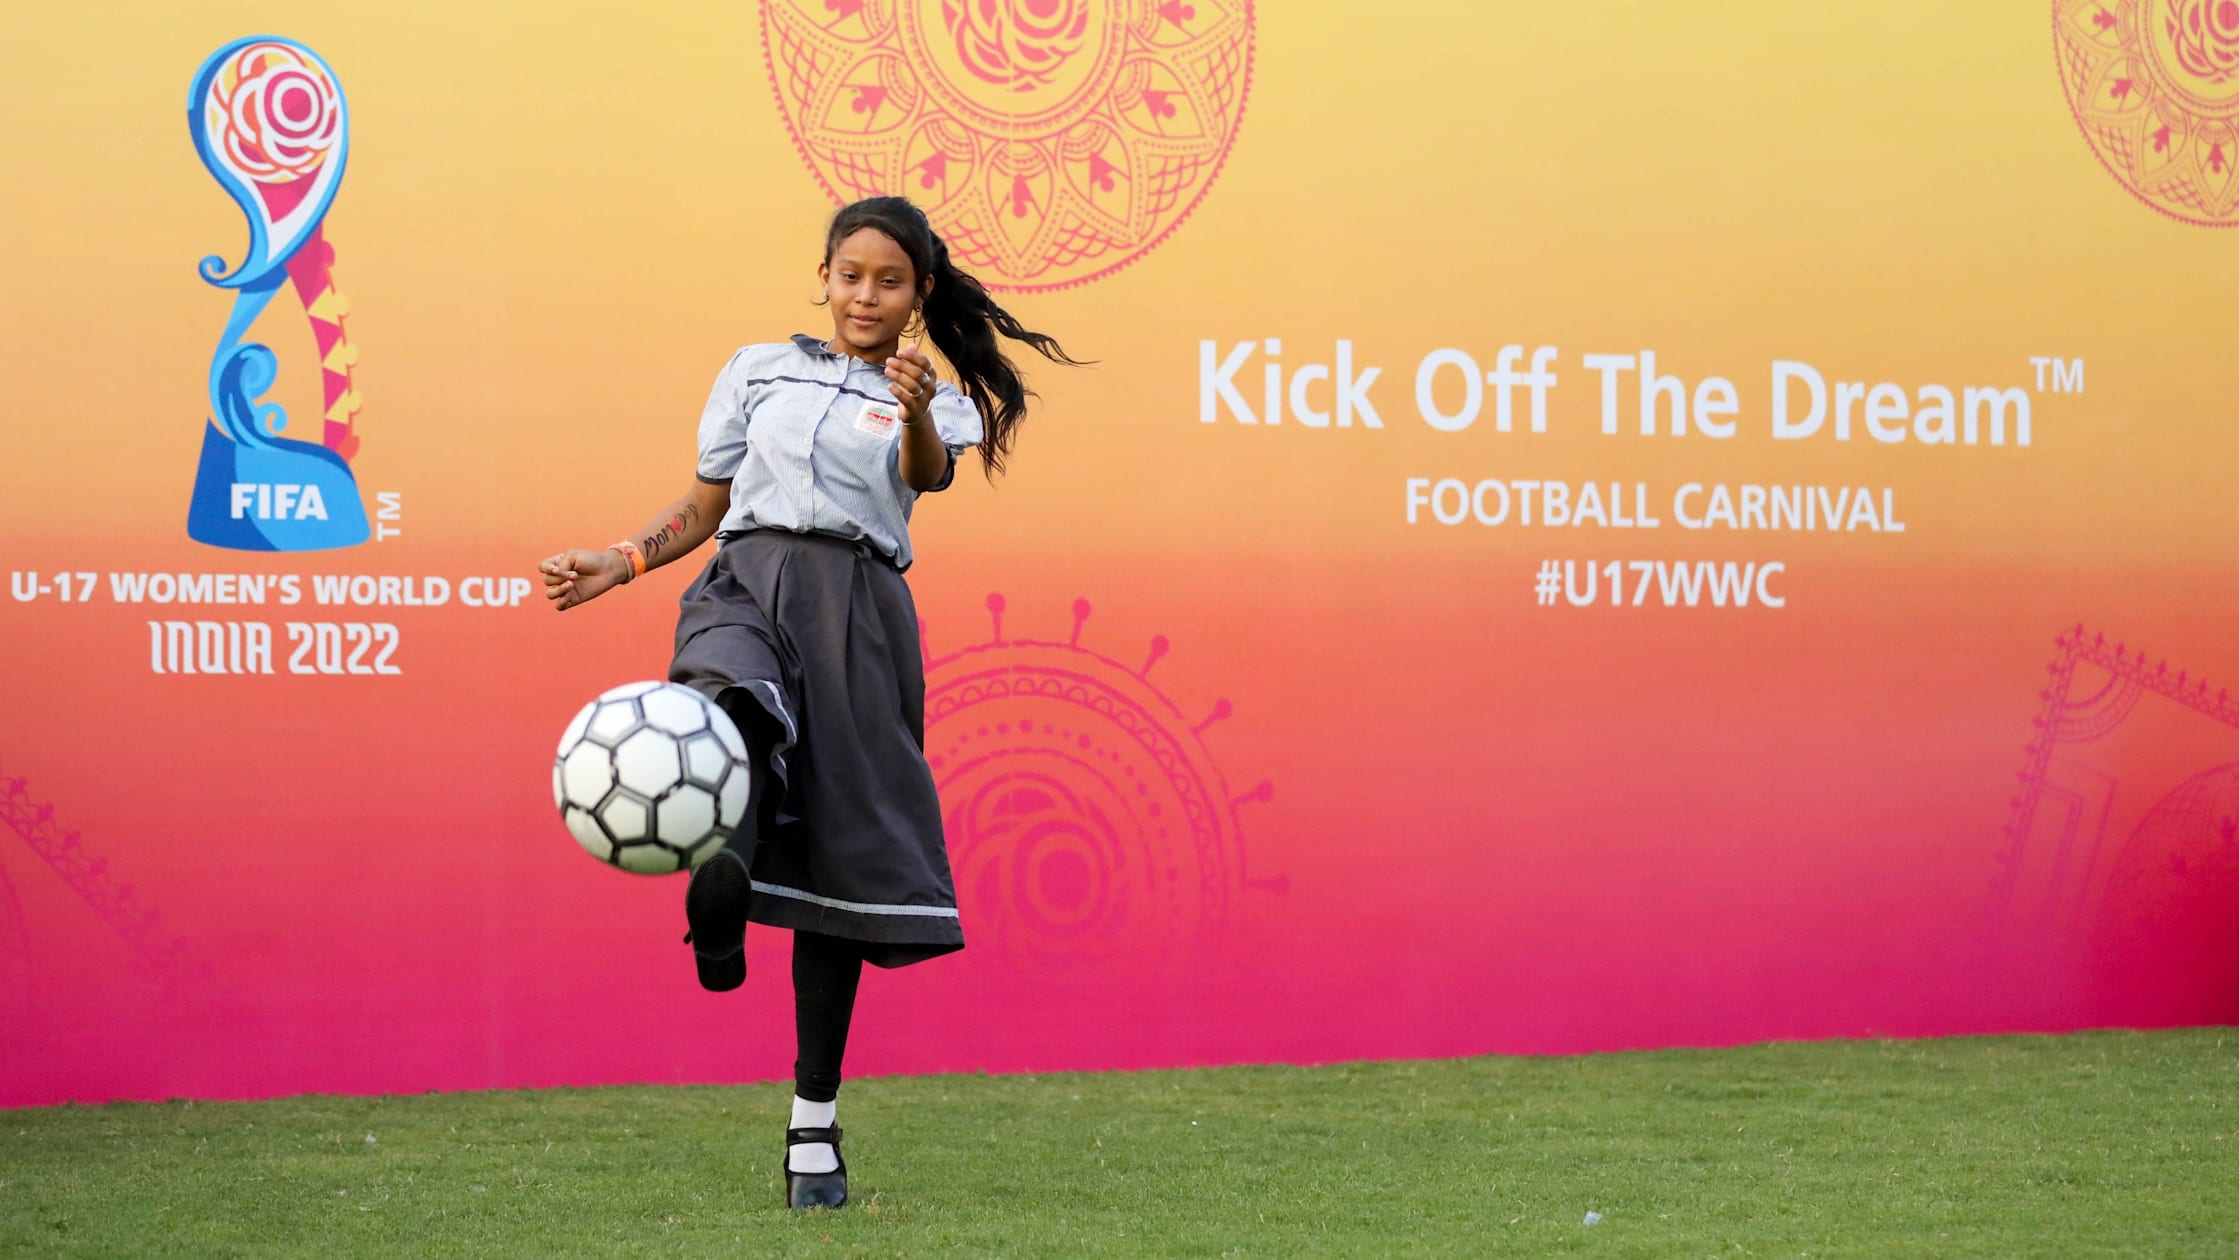 FIFA U-17 Womens World Cup 2022 Get schedule and watch live streaming and telecast in India